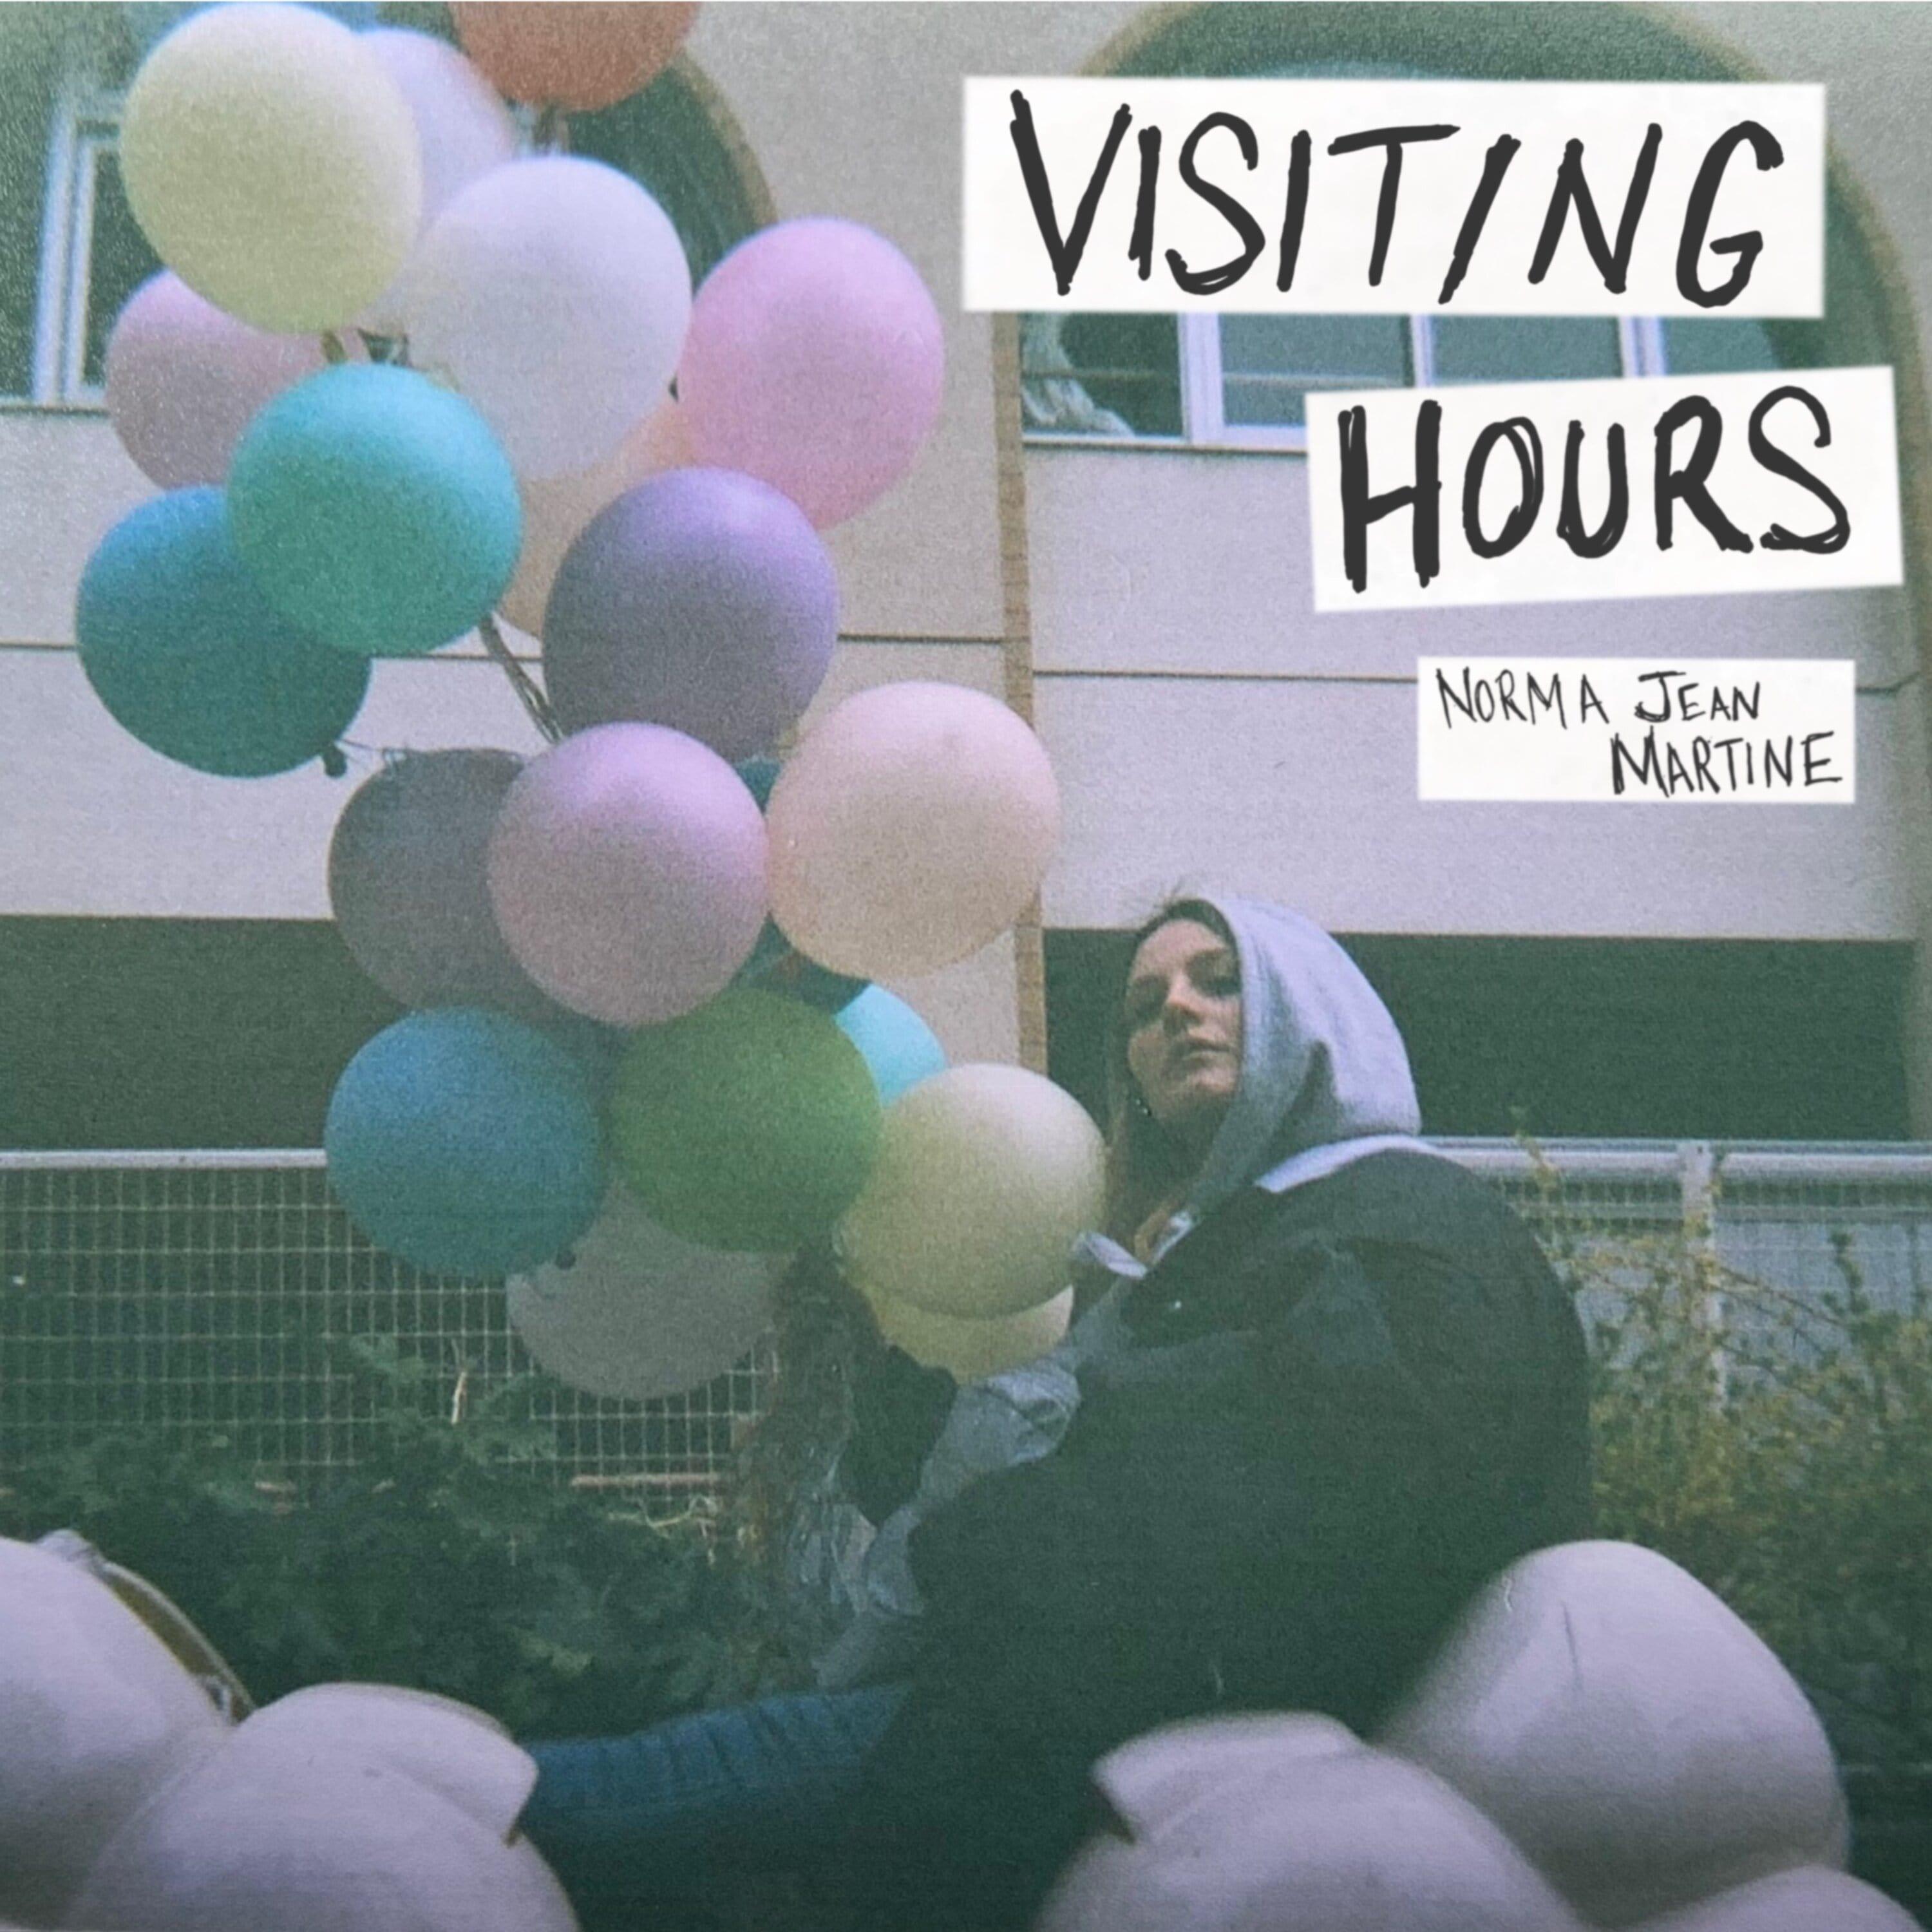 Norma Jean Martine - VISITING HOURS (MOTi Version)